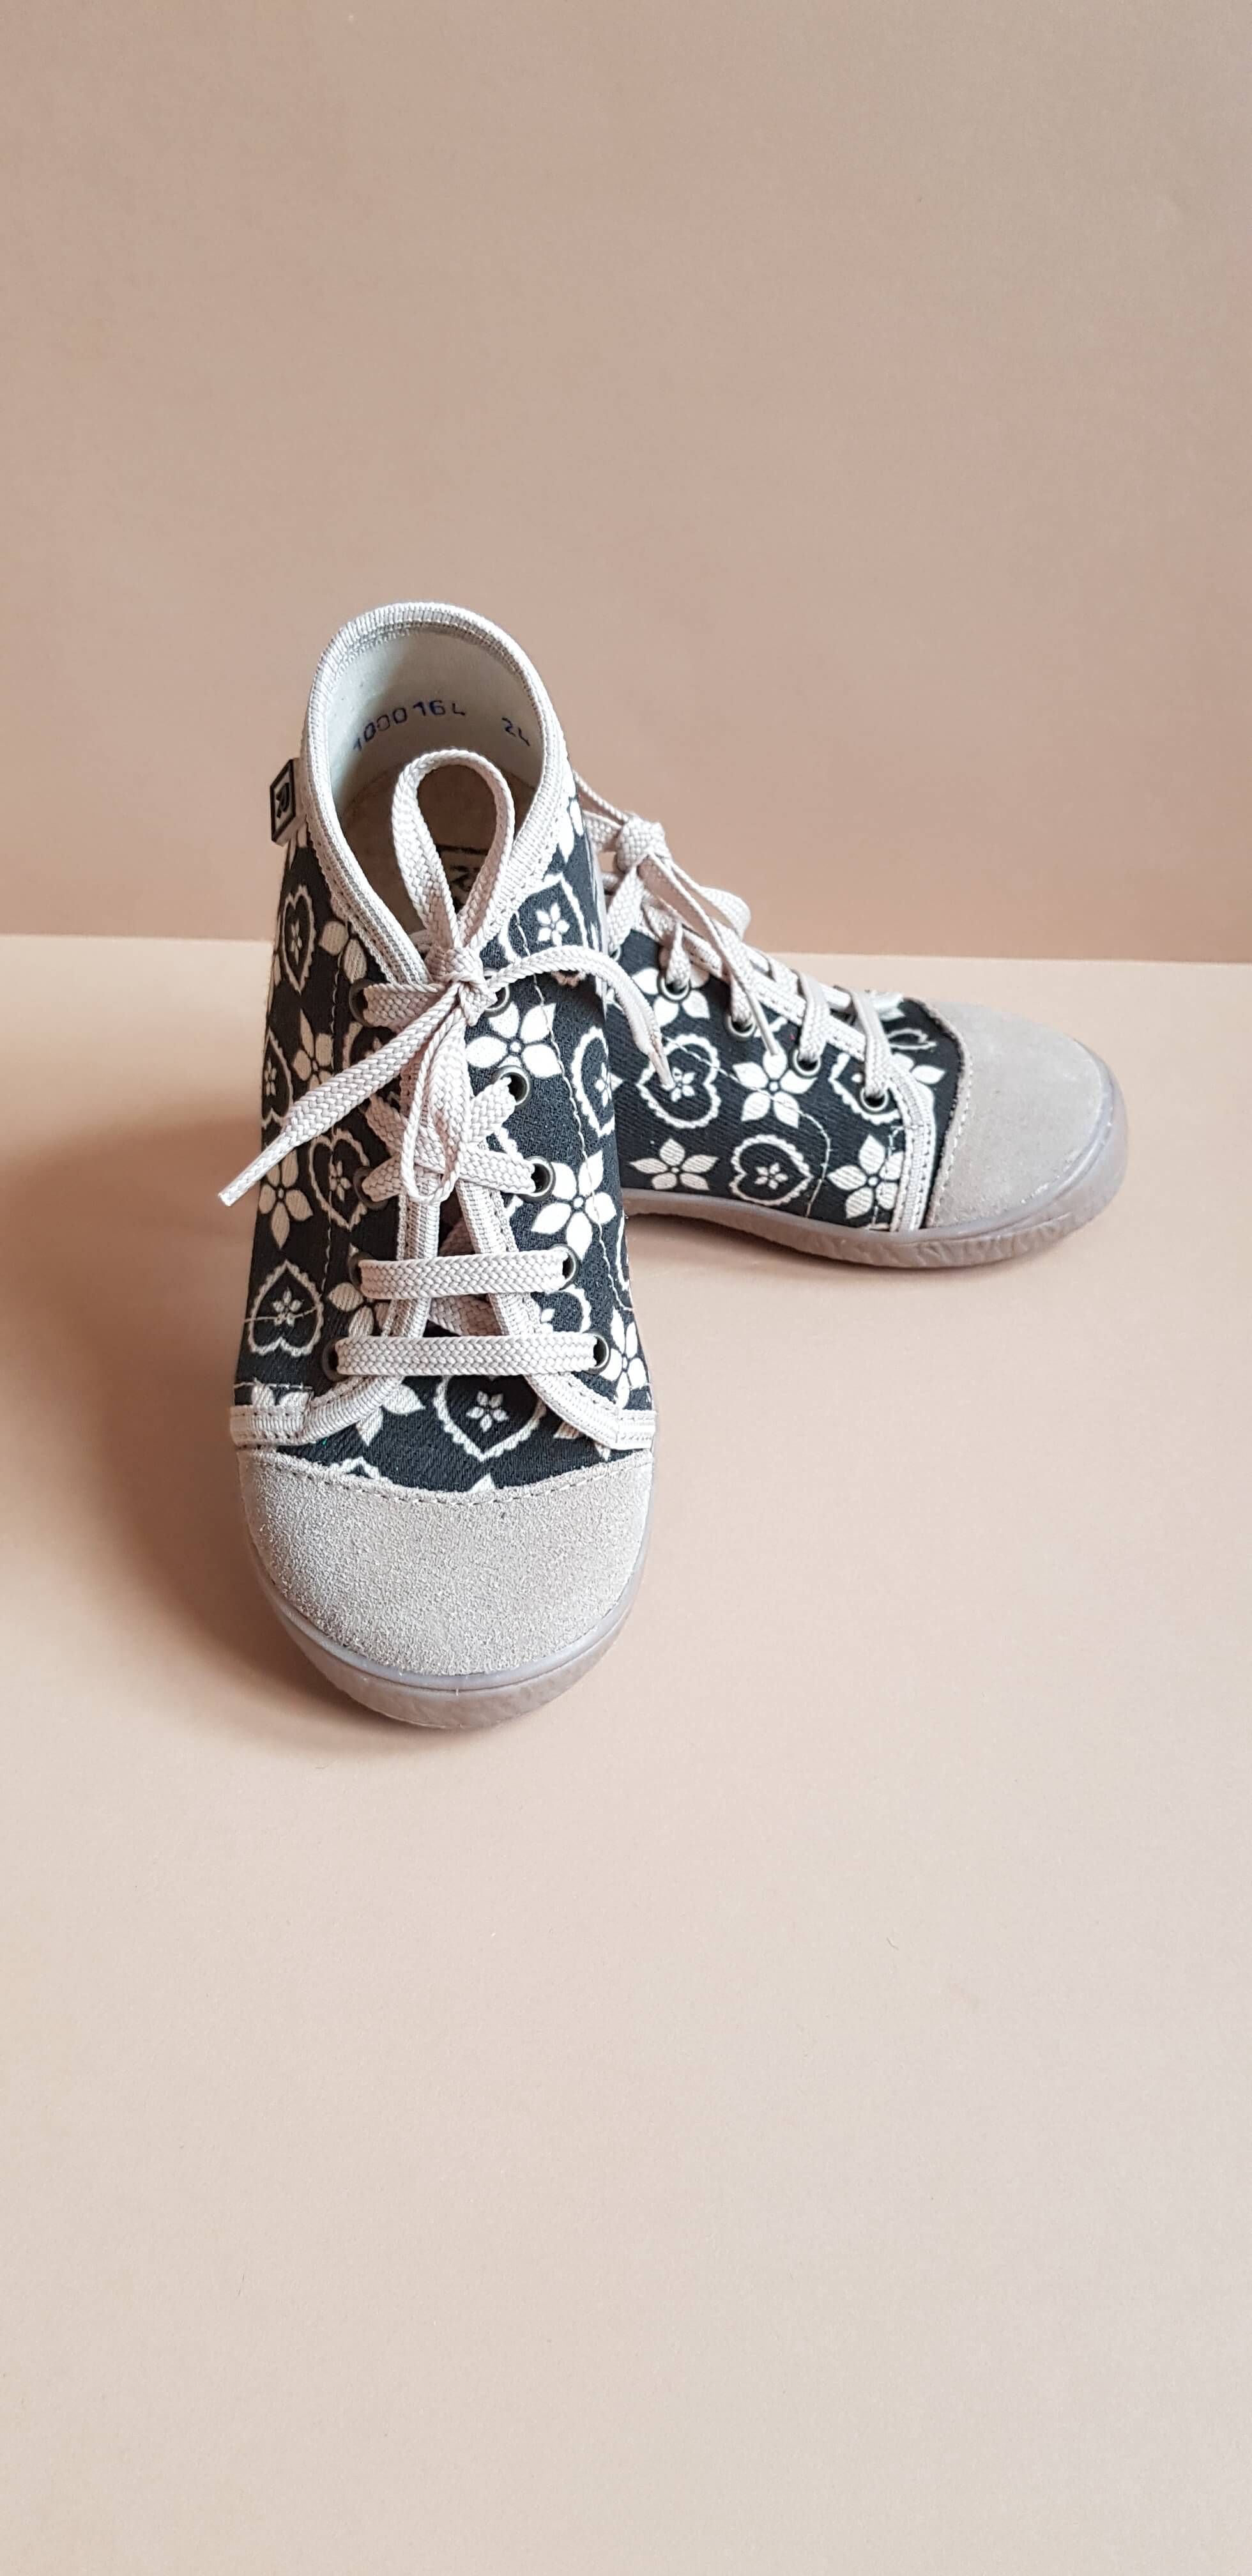 Children's Preschool Trainers - Printed with Laces